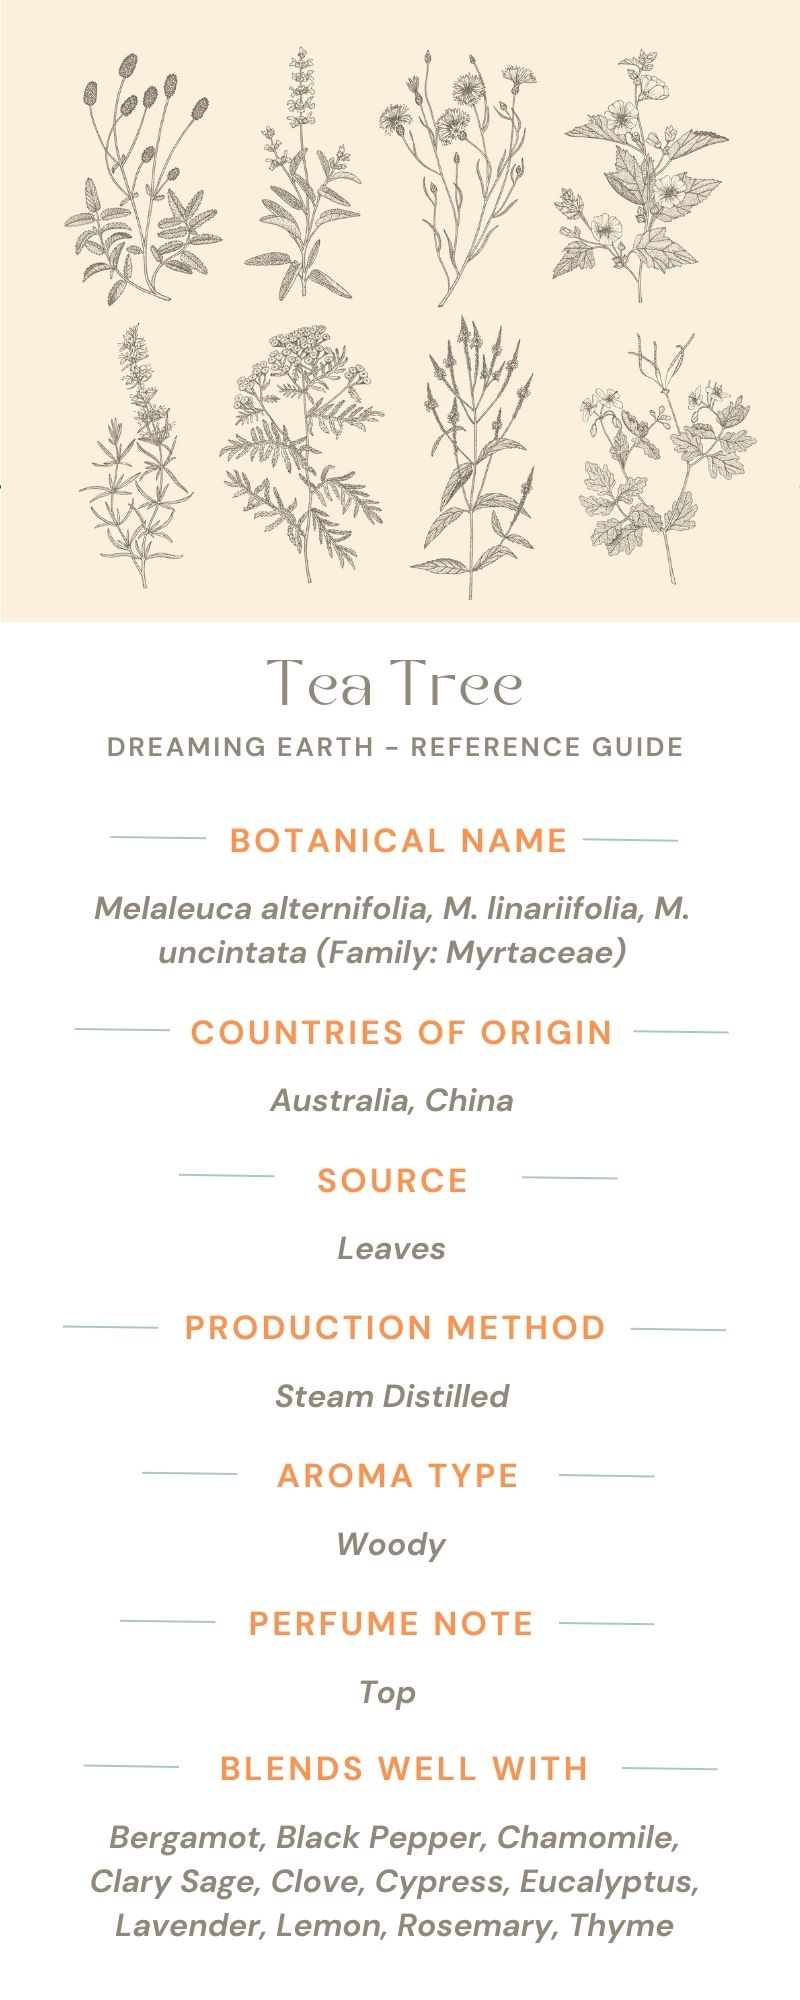 Load image into Gallery viewer, Tea Tree - Organic Essential Oil - Dreaming Earth Inc
